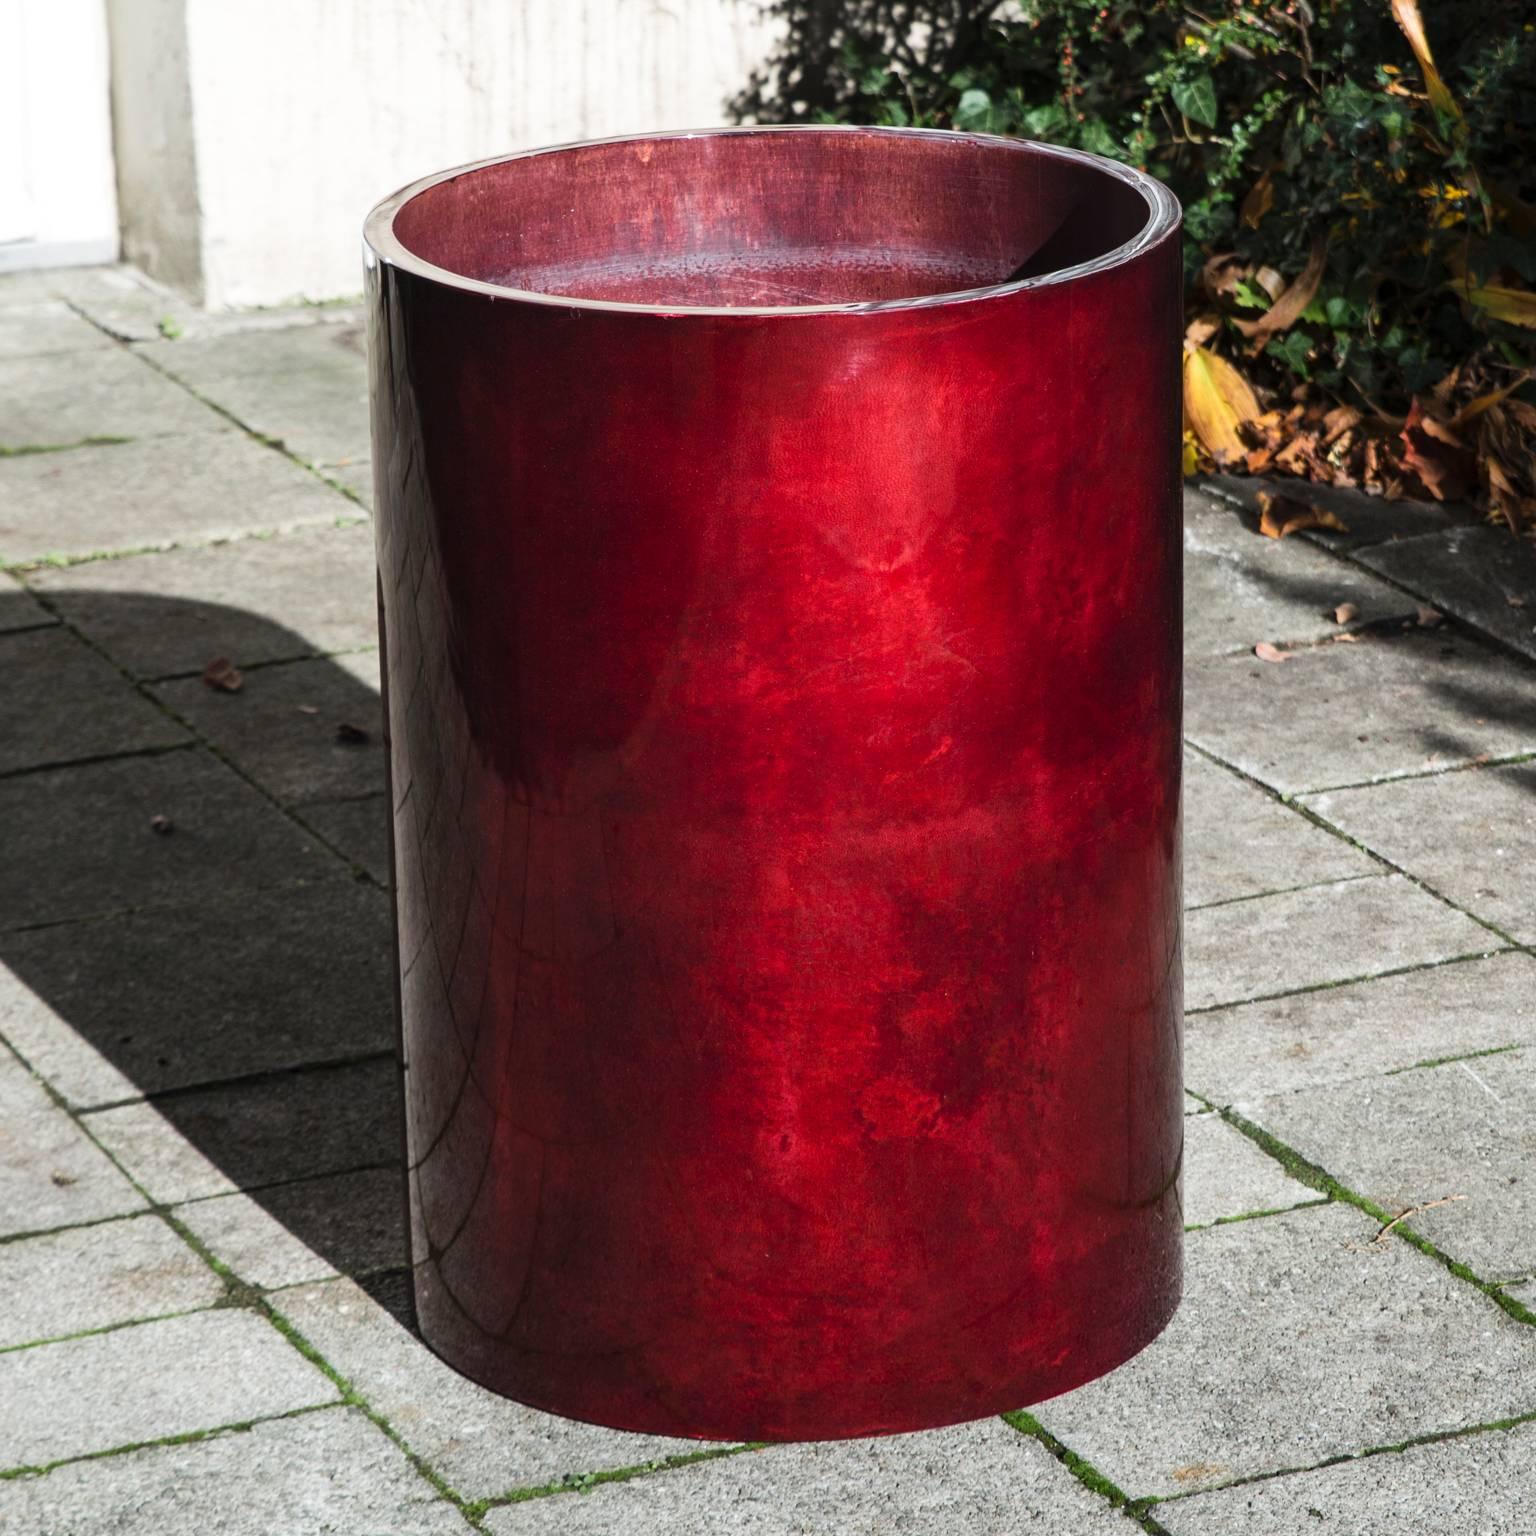 Elegant red round goatskin planter by Aldo Tura, 1974.
Different models and sizes available.